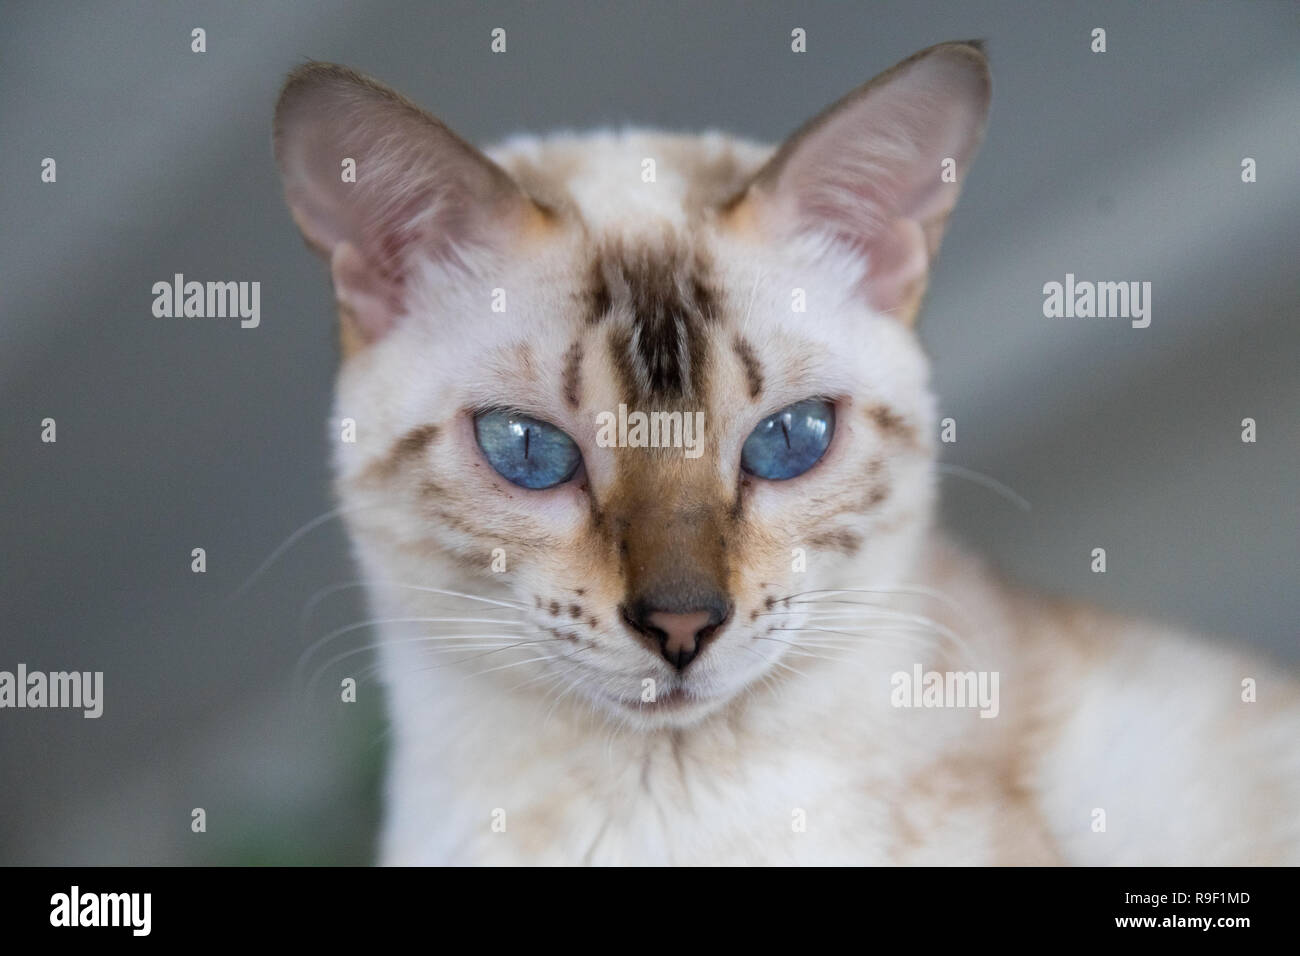 Cat with awesome blue eyes Stock Photo